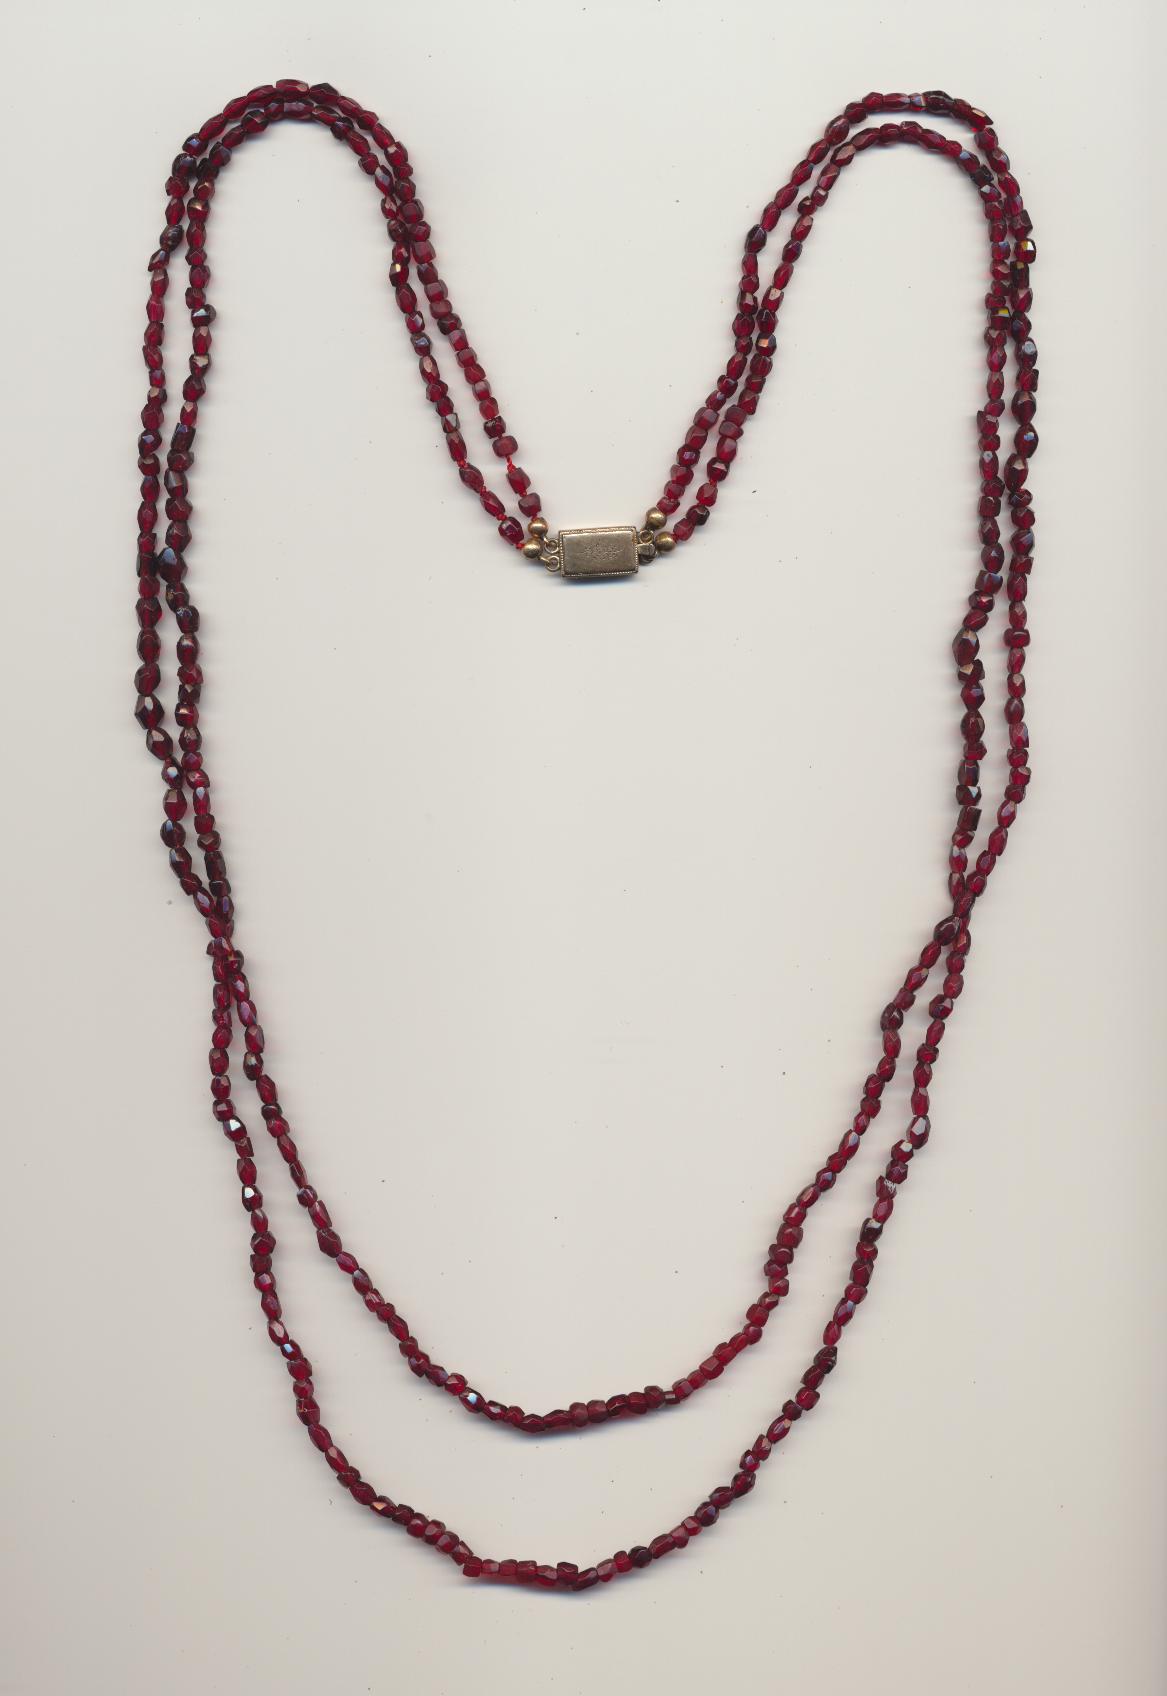 Antique so called farmers necklace made of red garnets, on red cotton thread with gold clasp, Bohemia, ca.1900, length inner row 29'' 74cm., outer row 30.3.'' 77cm.